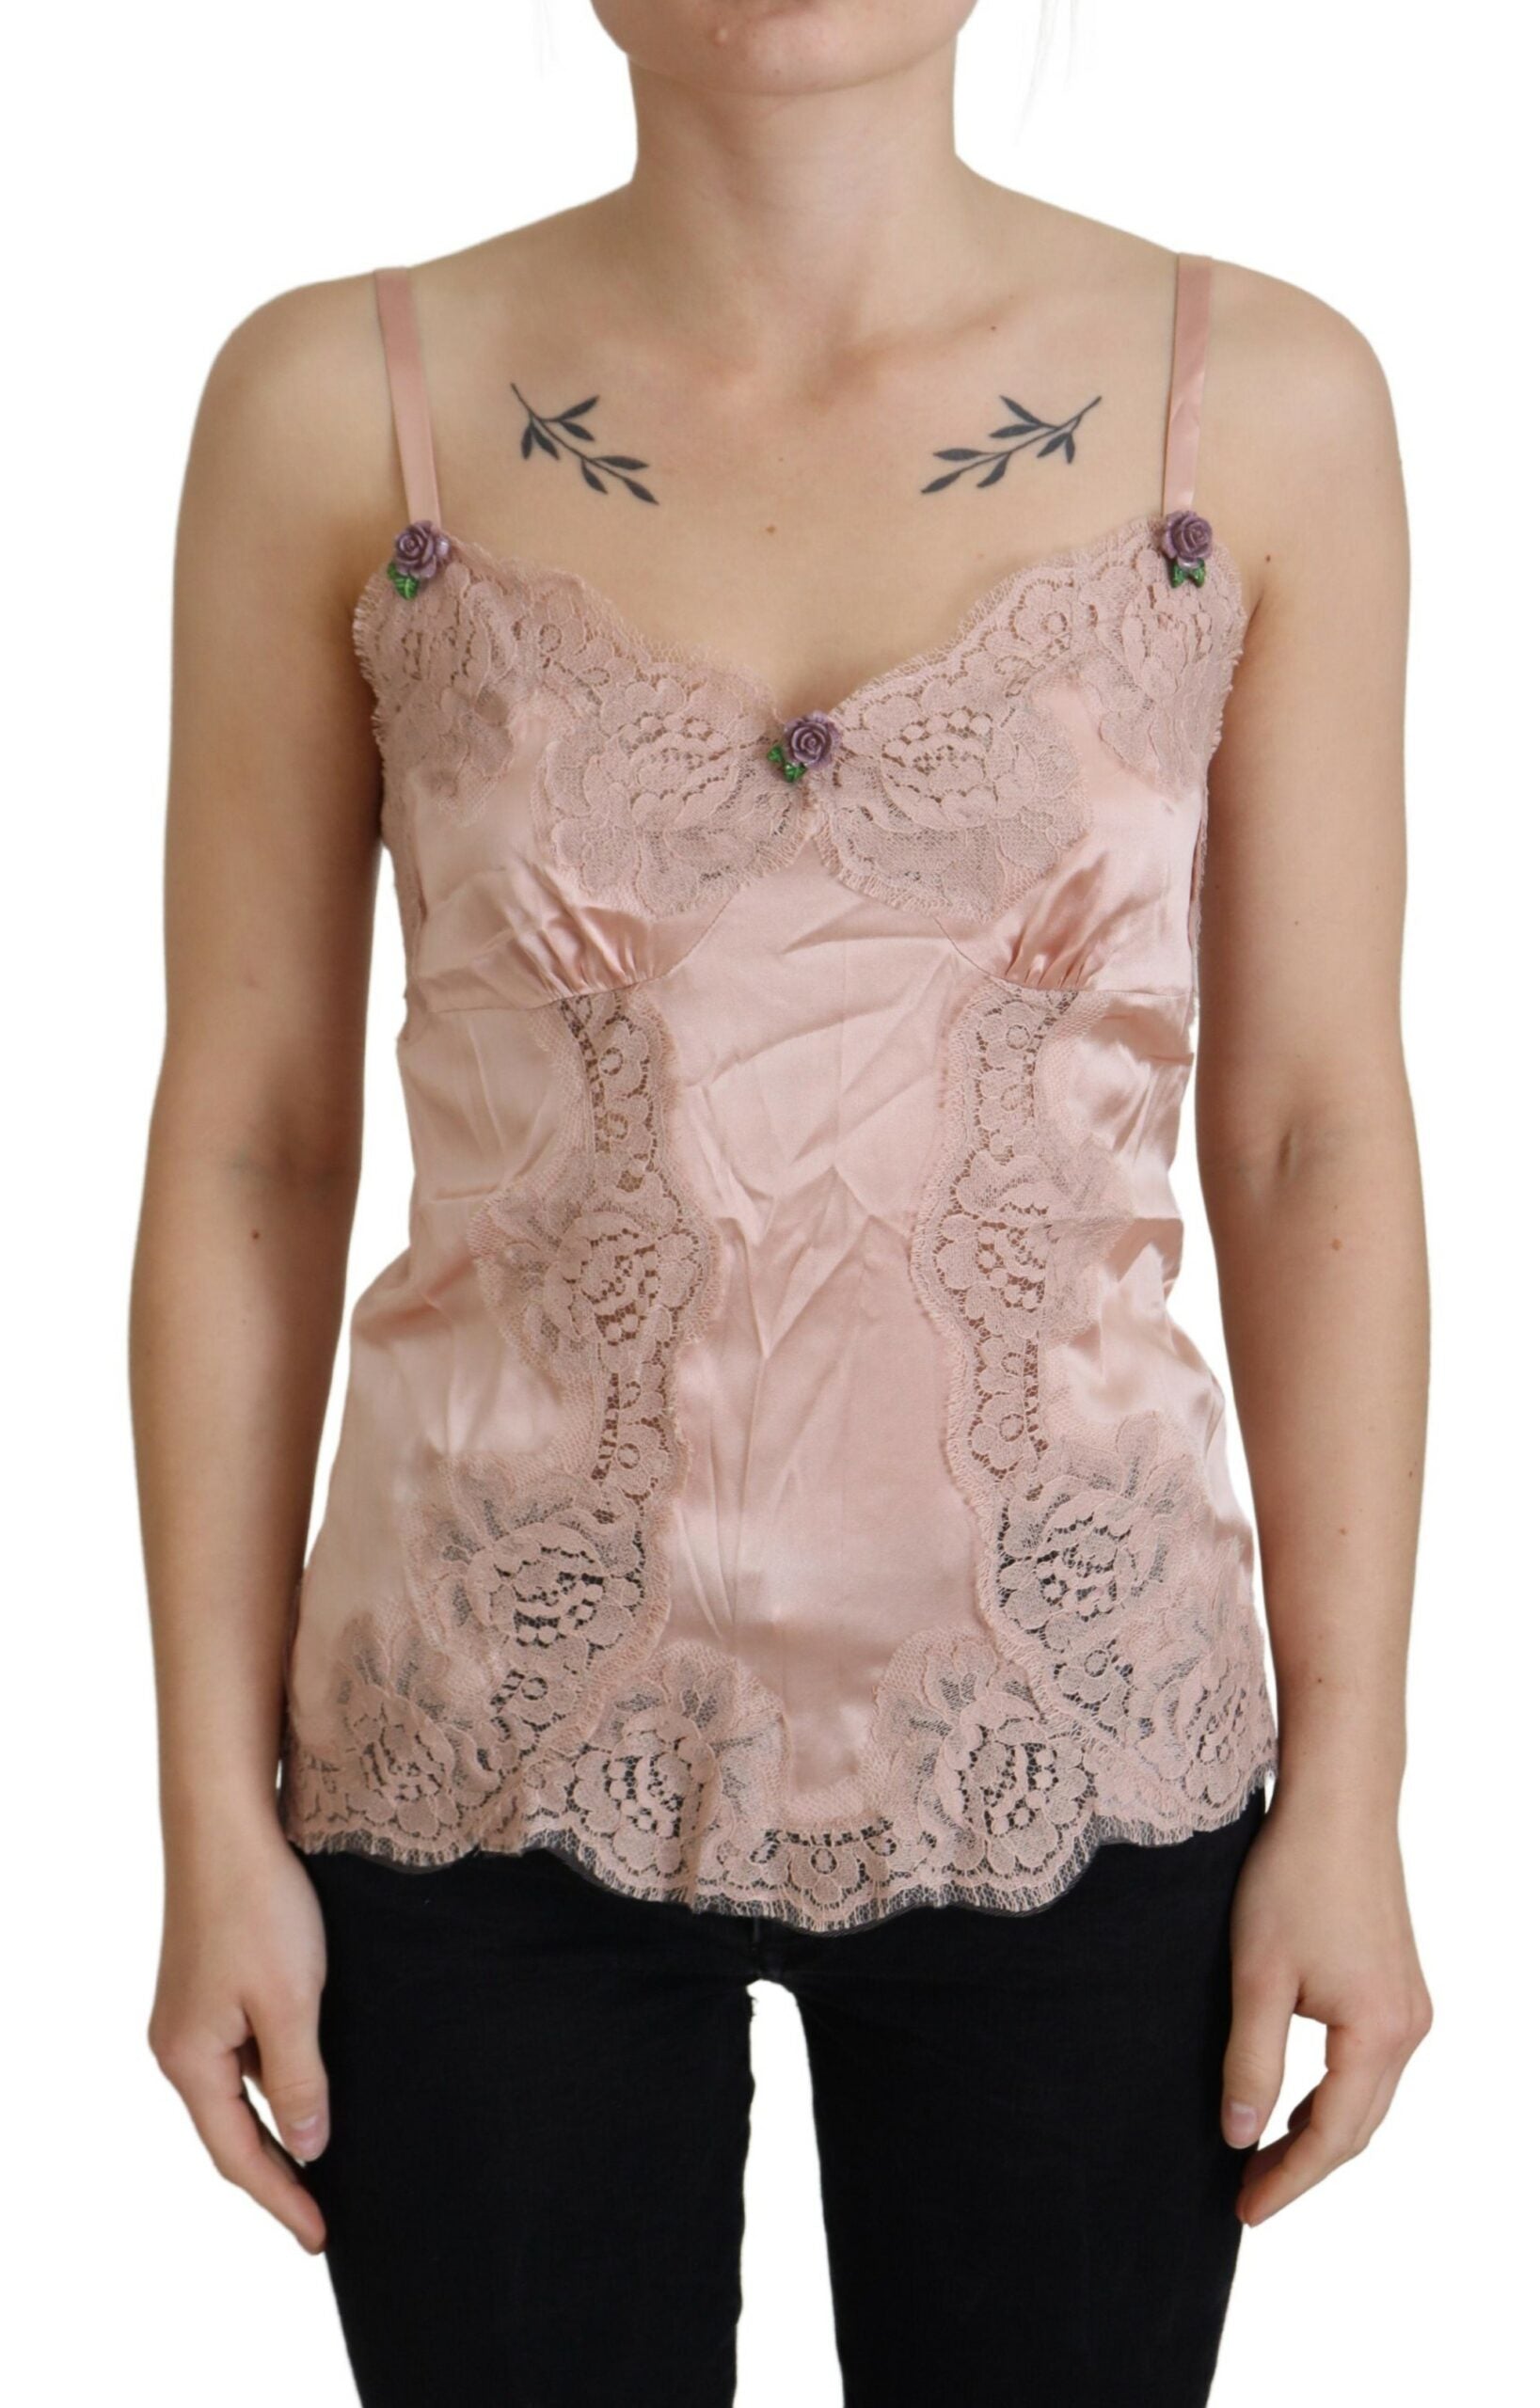 #2 - Dolce & Gabbana Pink Satin Lace Roses Tank Top Lingerie